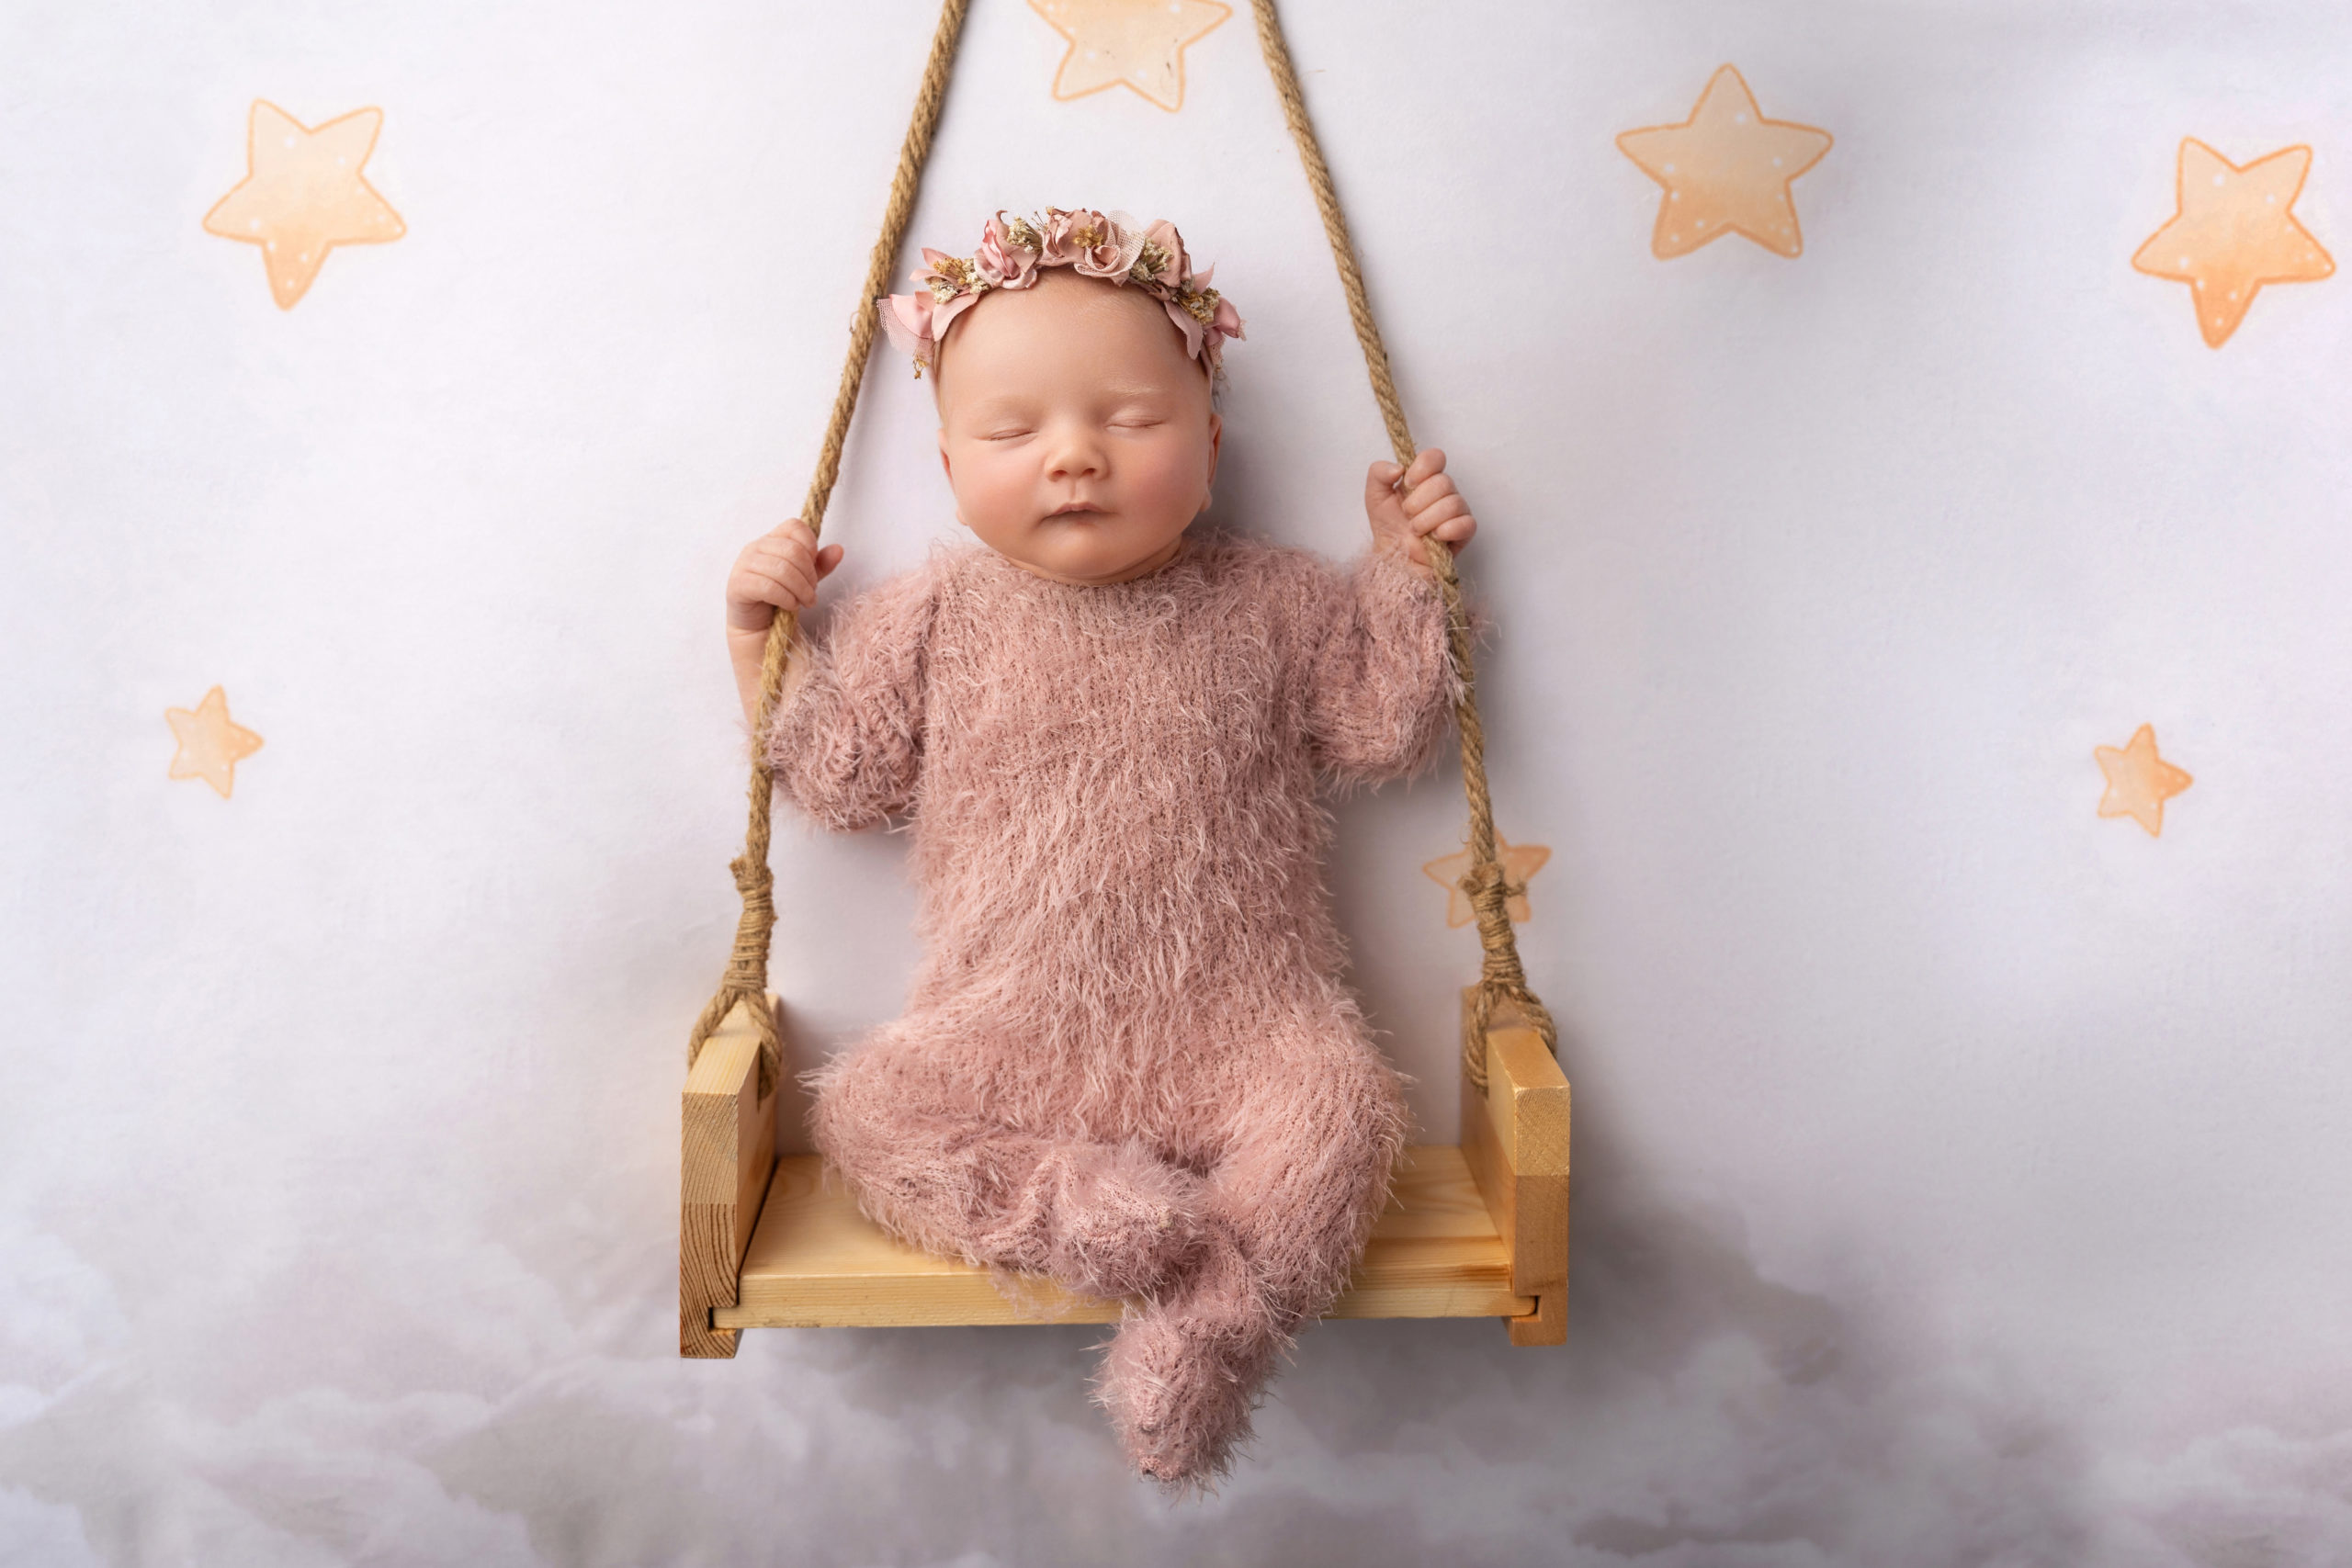 baby girl posed in swing set up with stars surrounding